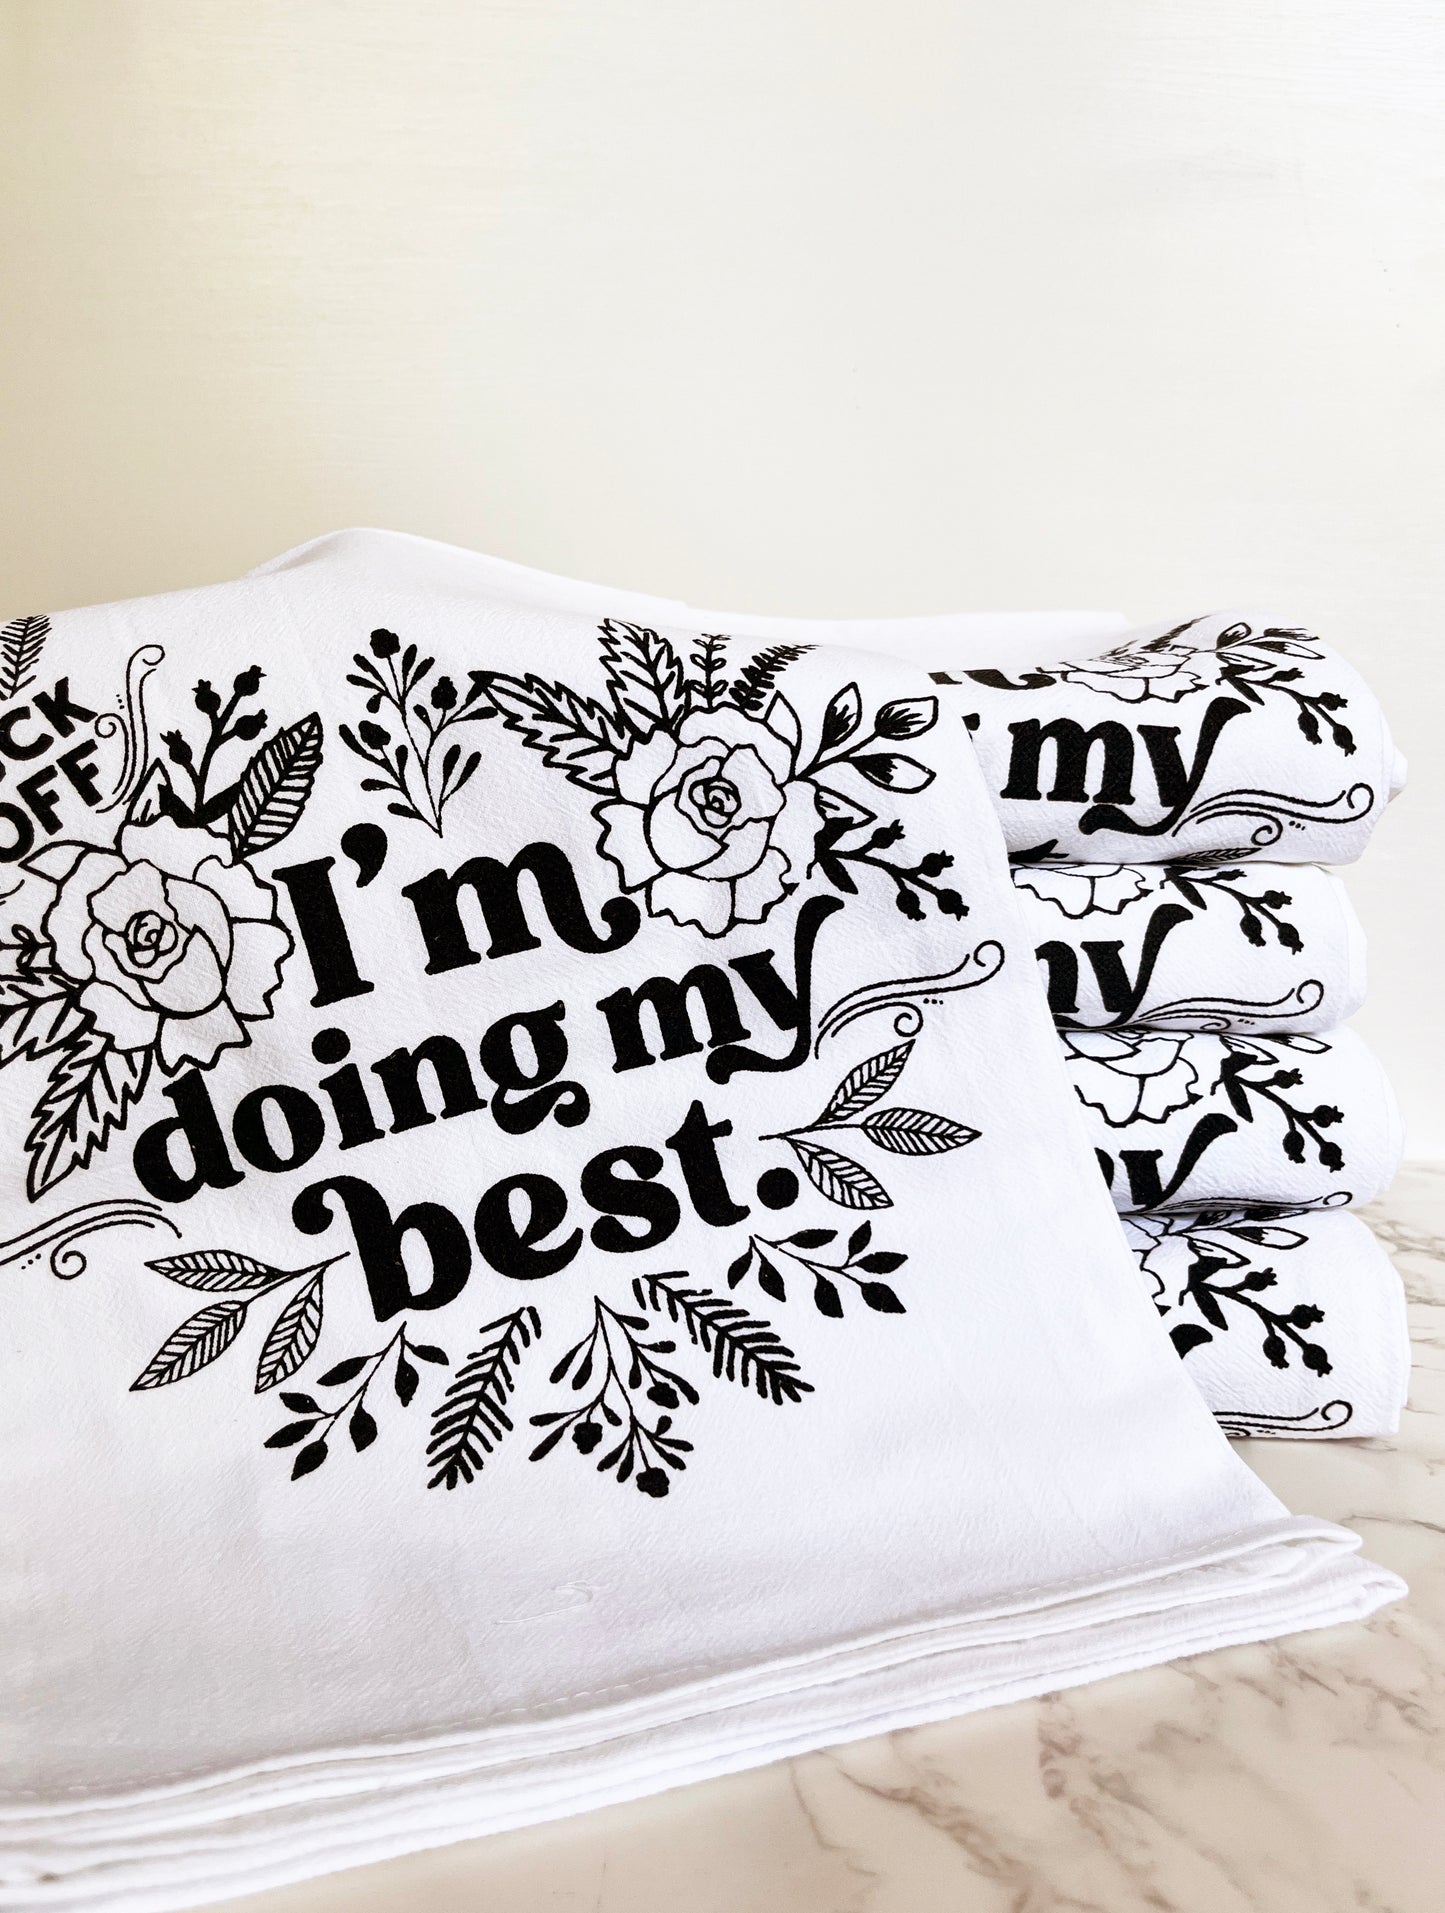 pretty vintage floral flower black white screen print design large cotton high quality kitchen dish bar tea towel funny phrase fuck off im doing my best cuss word snark humor home decor modern joke overwhelmed anxiety mental health coin laundry 